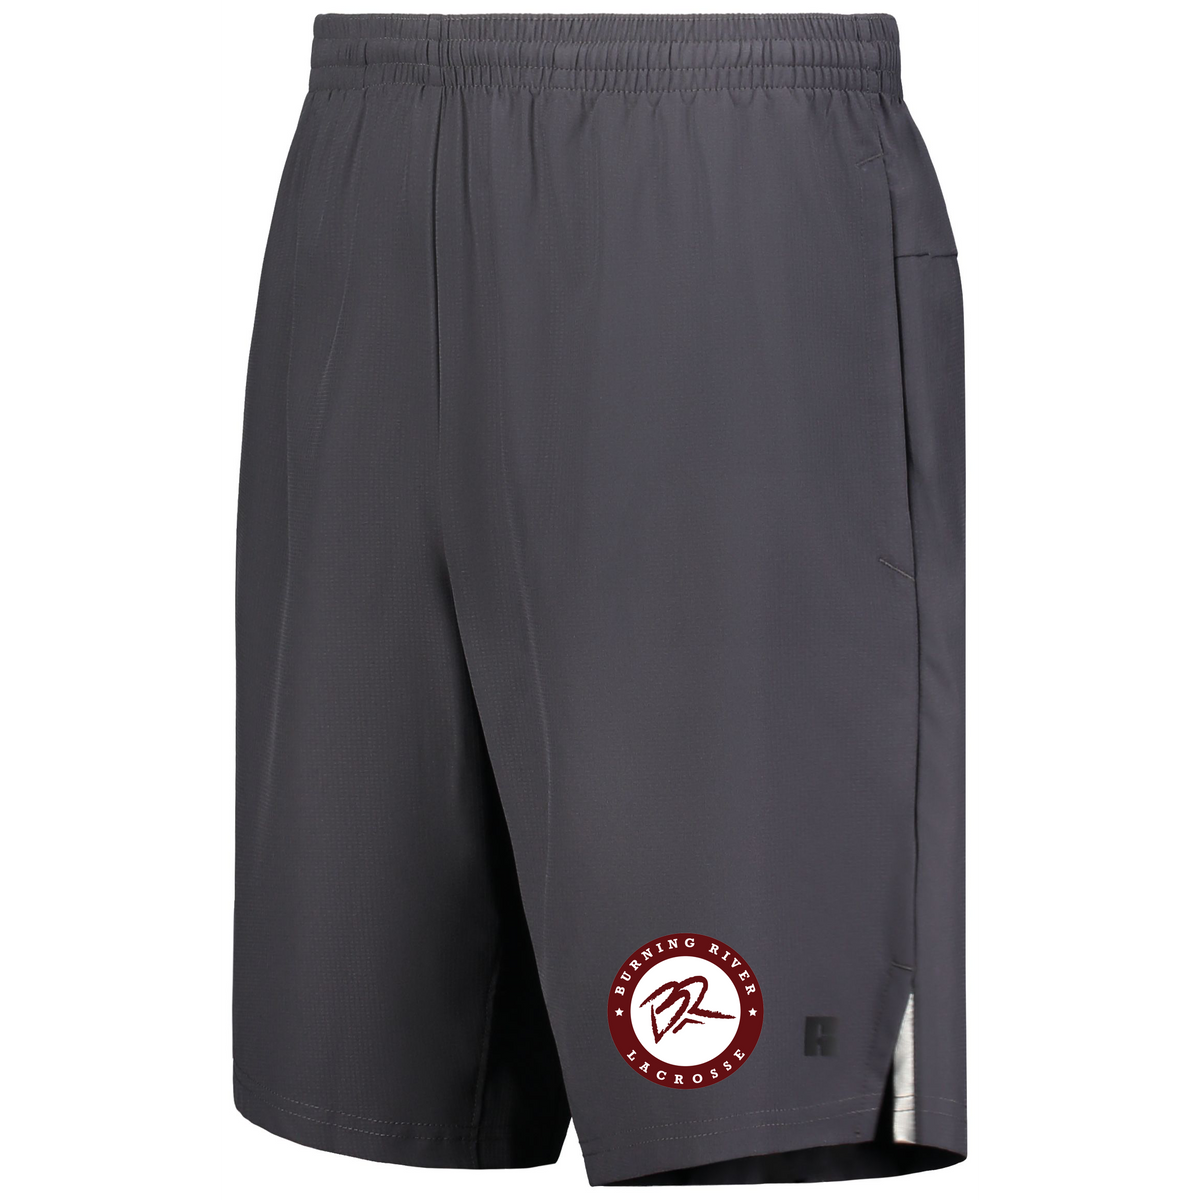 Burning River Girls Lacrosse Russell Legend Woven Shorts